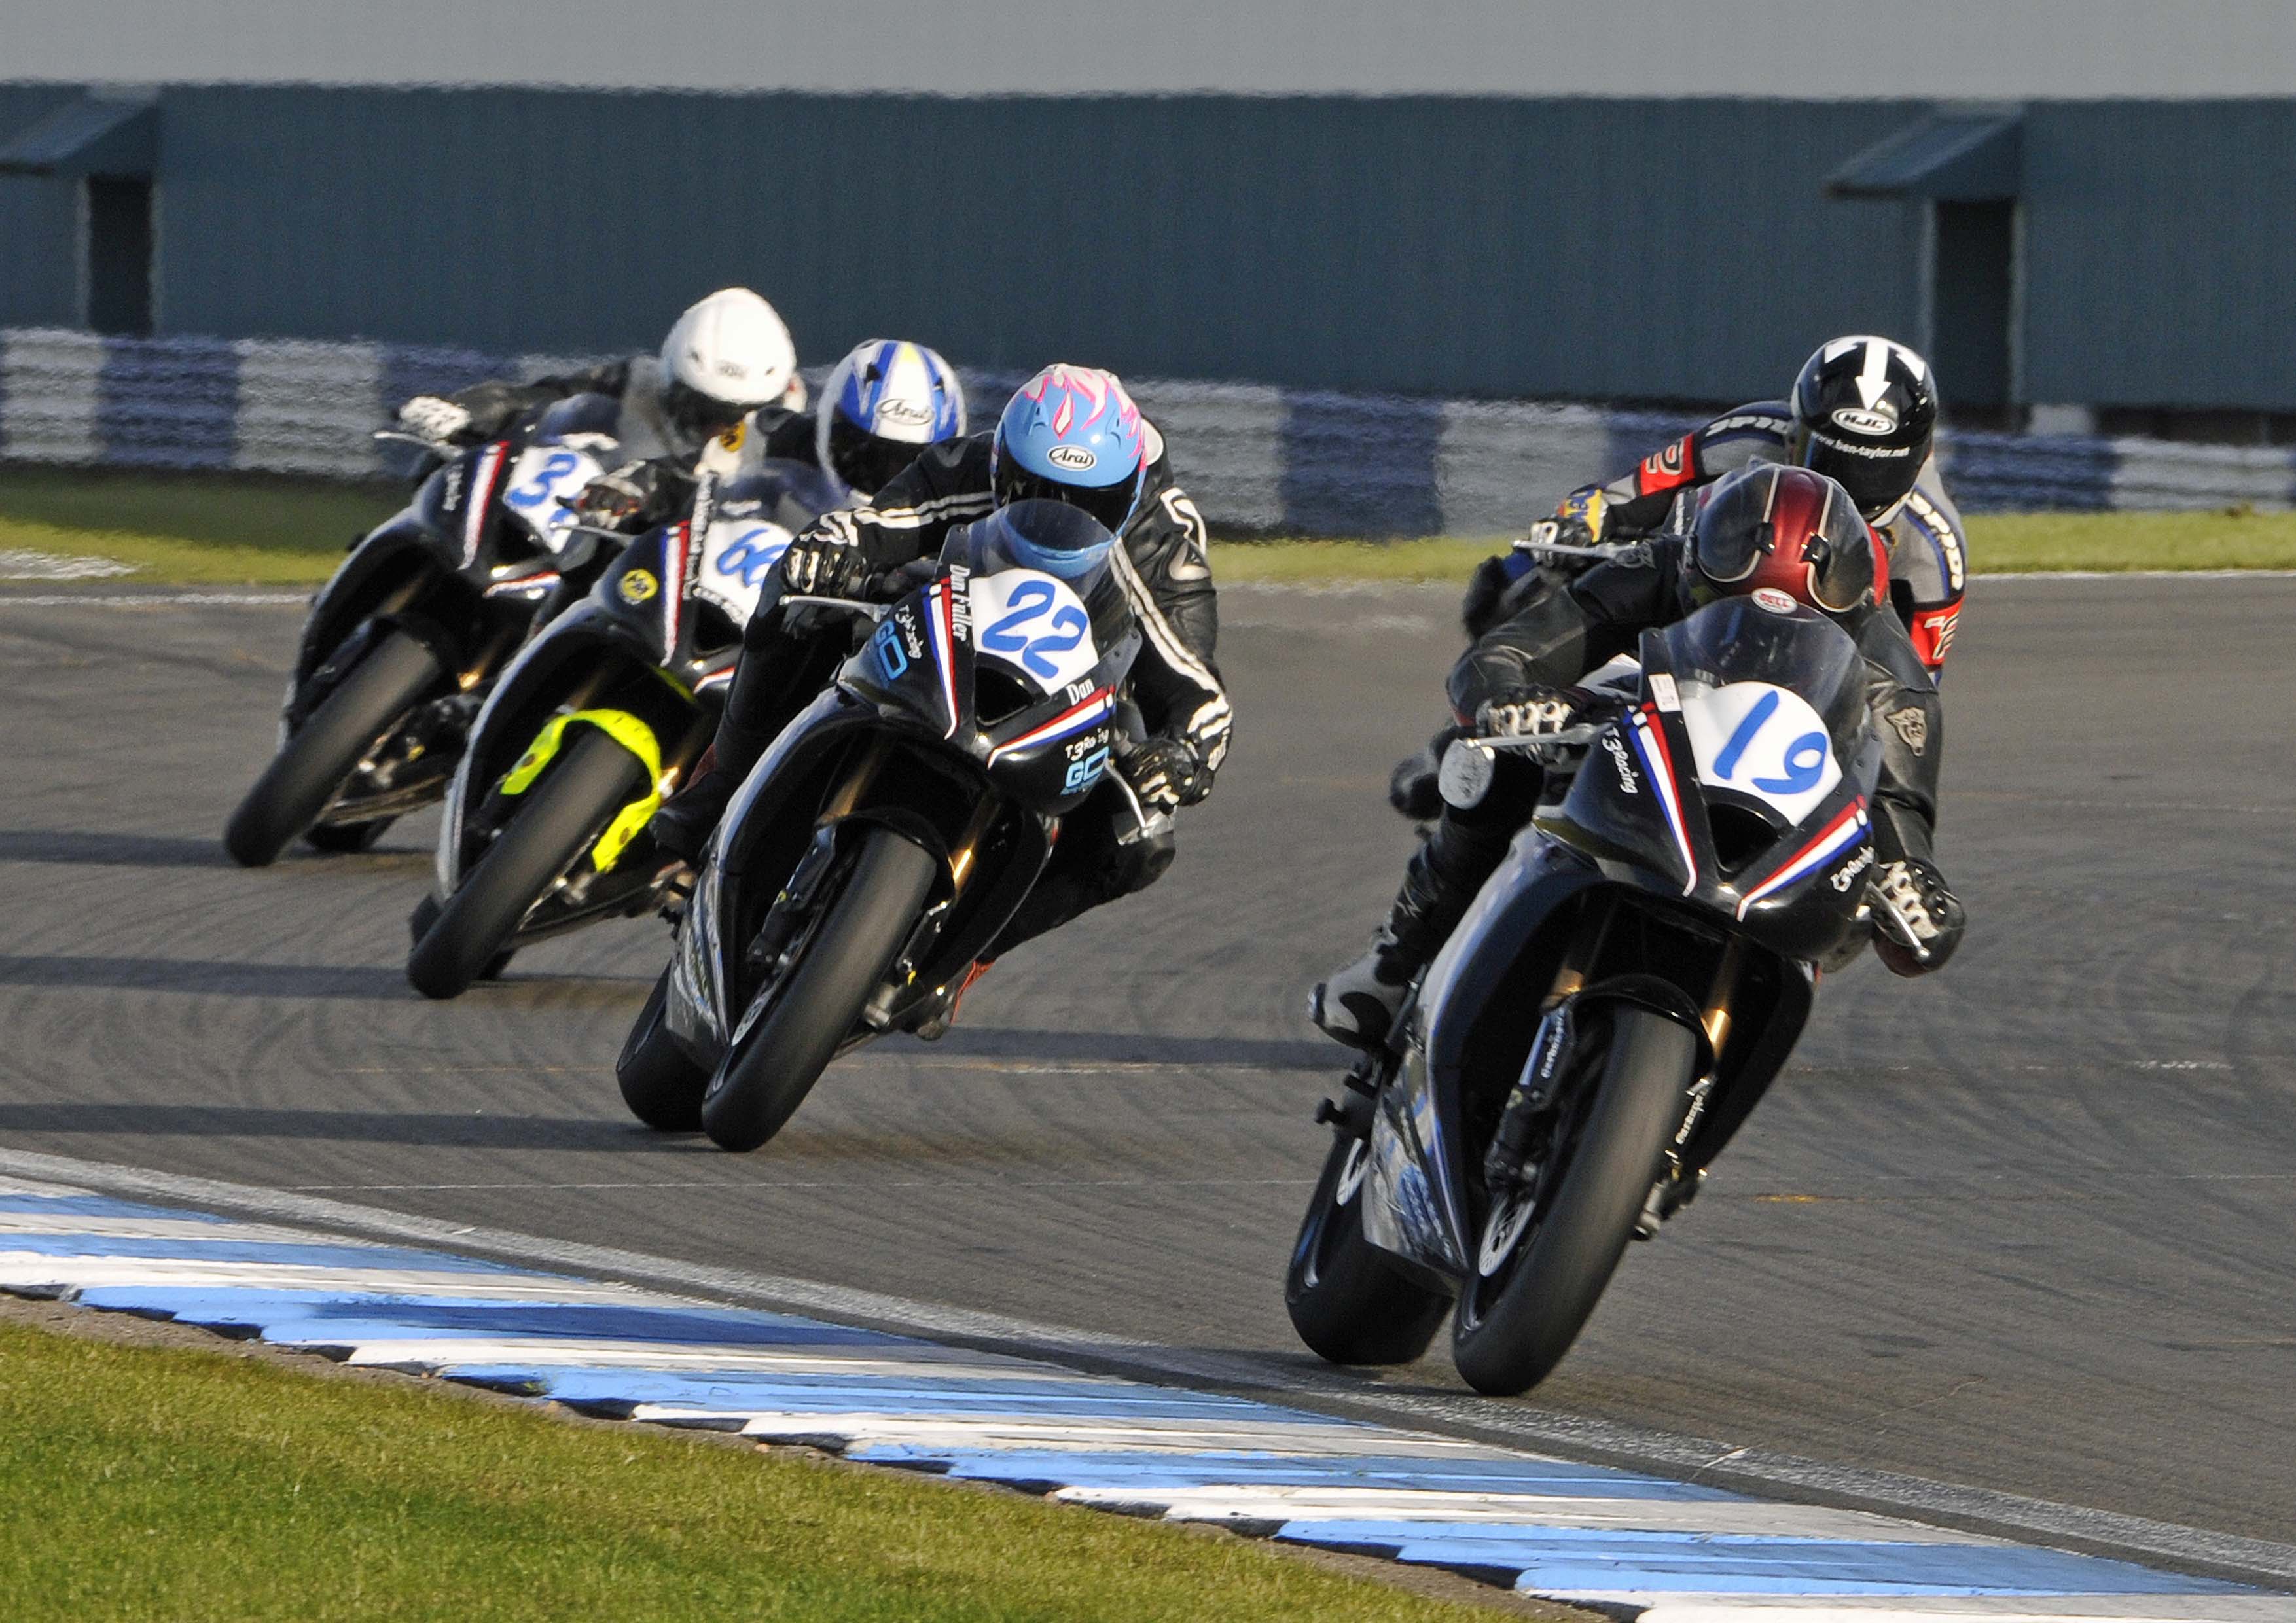 34 riders ready for Triumph Triple Challenge